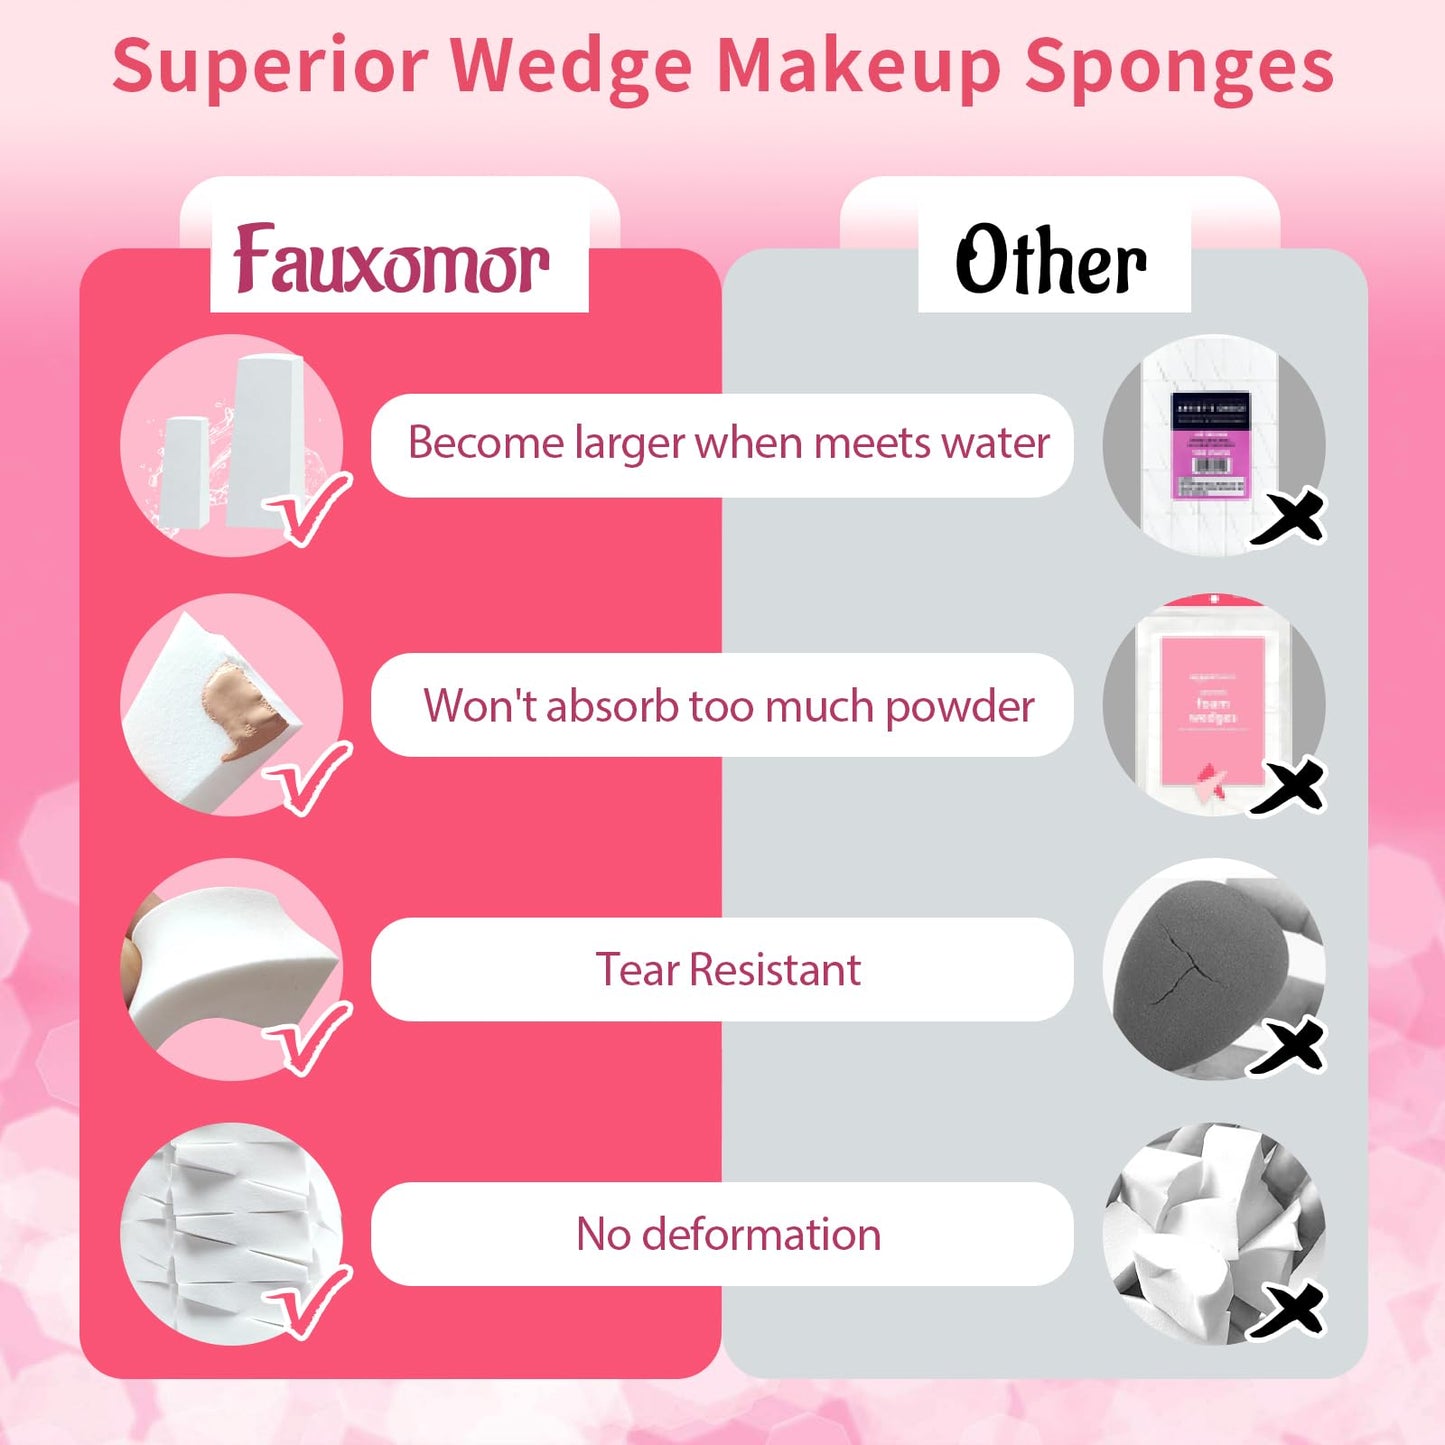 Fauxomor 216 Pcs Mini Makeup Sponges Wedges for Face Foundation, Latex-Free Triangle Cosmetic Make Up Sponge for All Skin Types, Beauty Blender for Flawless Application and Blending, Ideal Gift